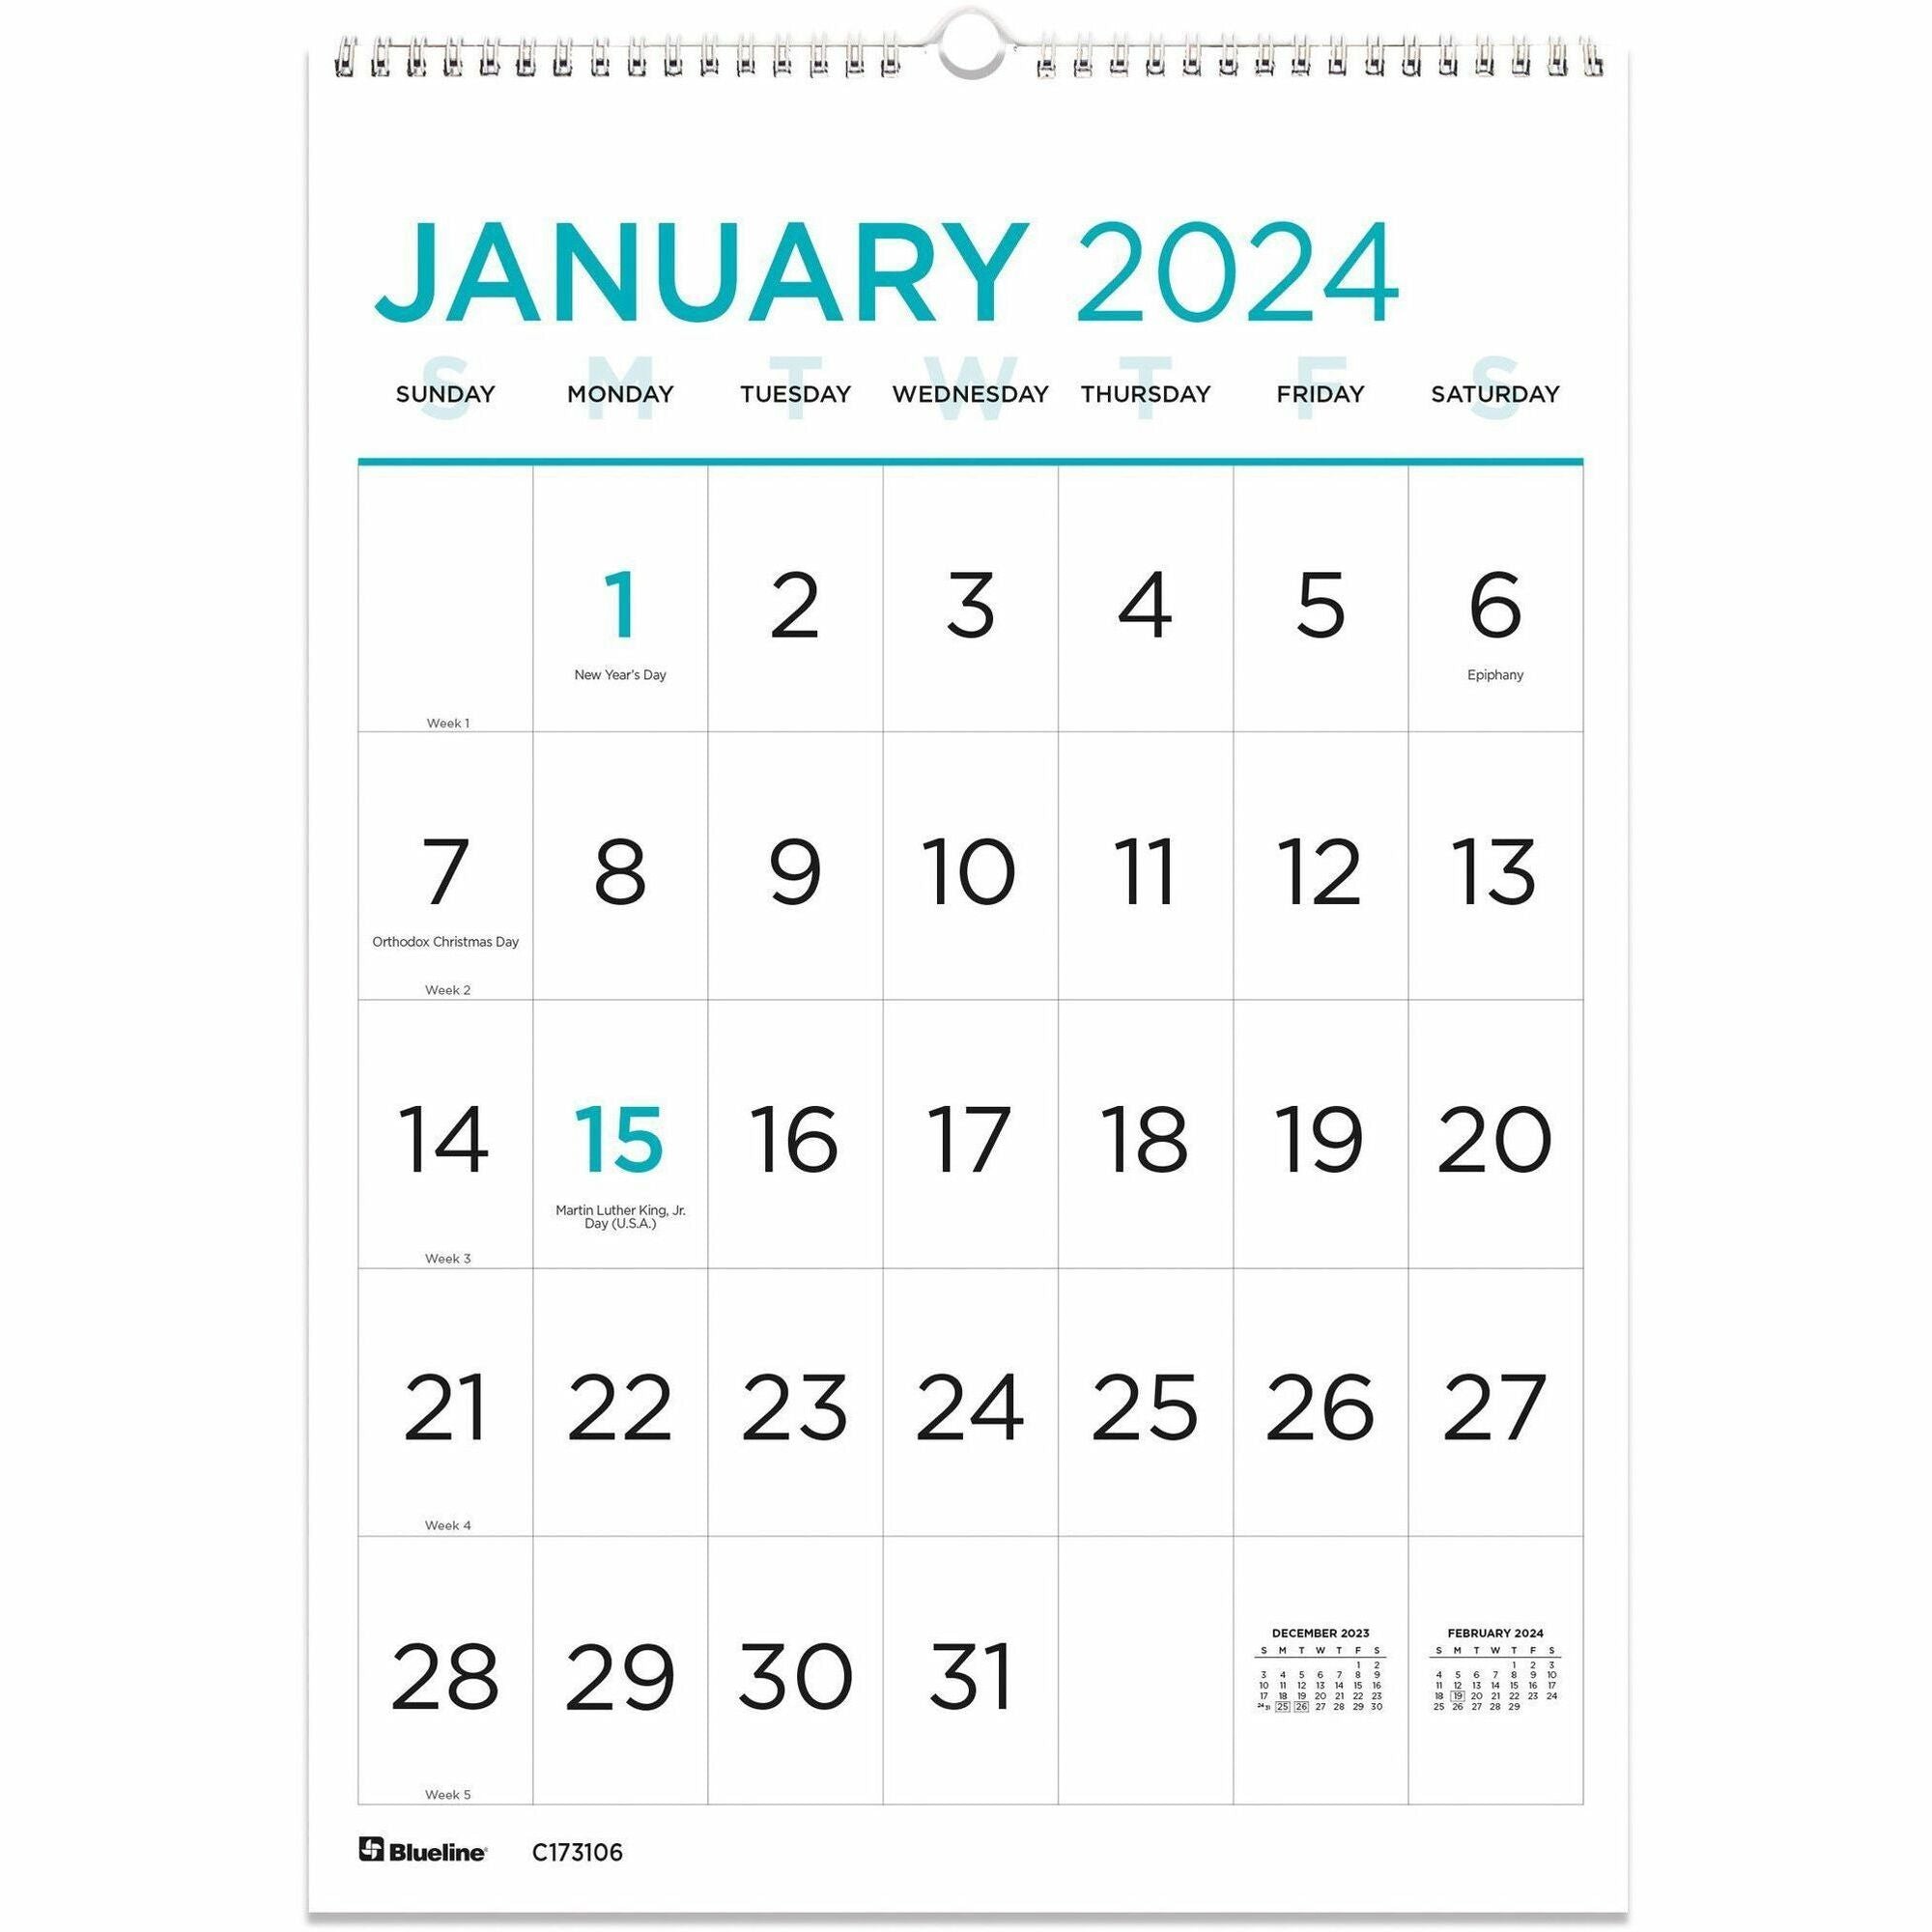 blueline-large-print-monthly-wall-calendar-monthly-12-month-january-2024-december-2024-1-month-single-page-layout-twin-wire-light-blue-chipboard-17-height-x-12-width-sturdy-reinforced-eyelet-ruled-daily-block-reference-calen_redc173106 - 1